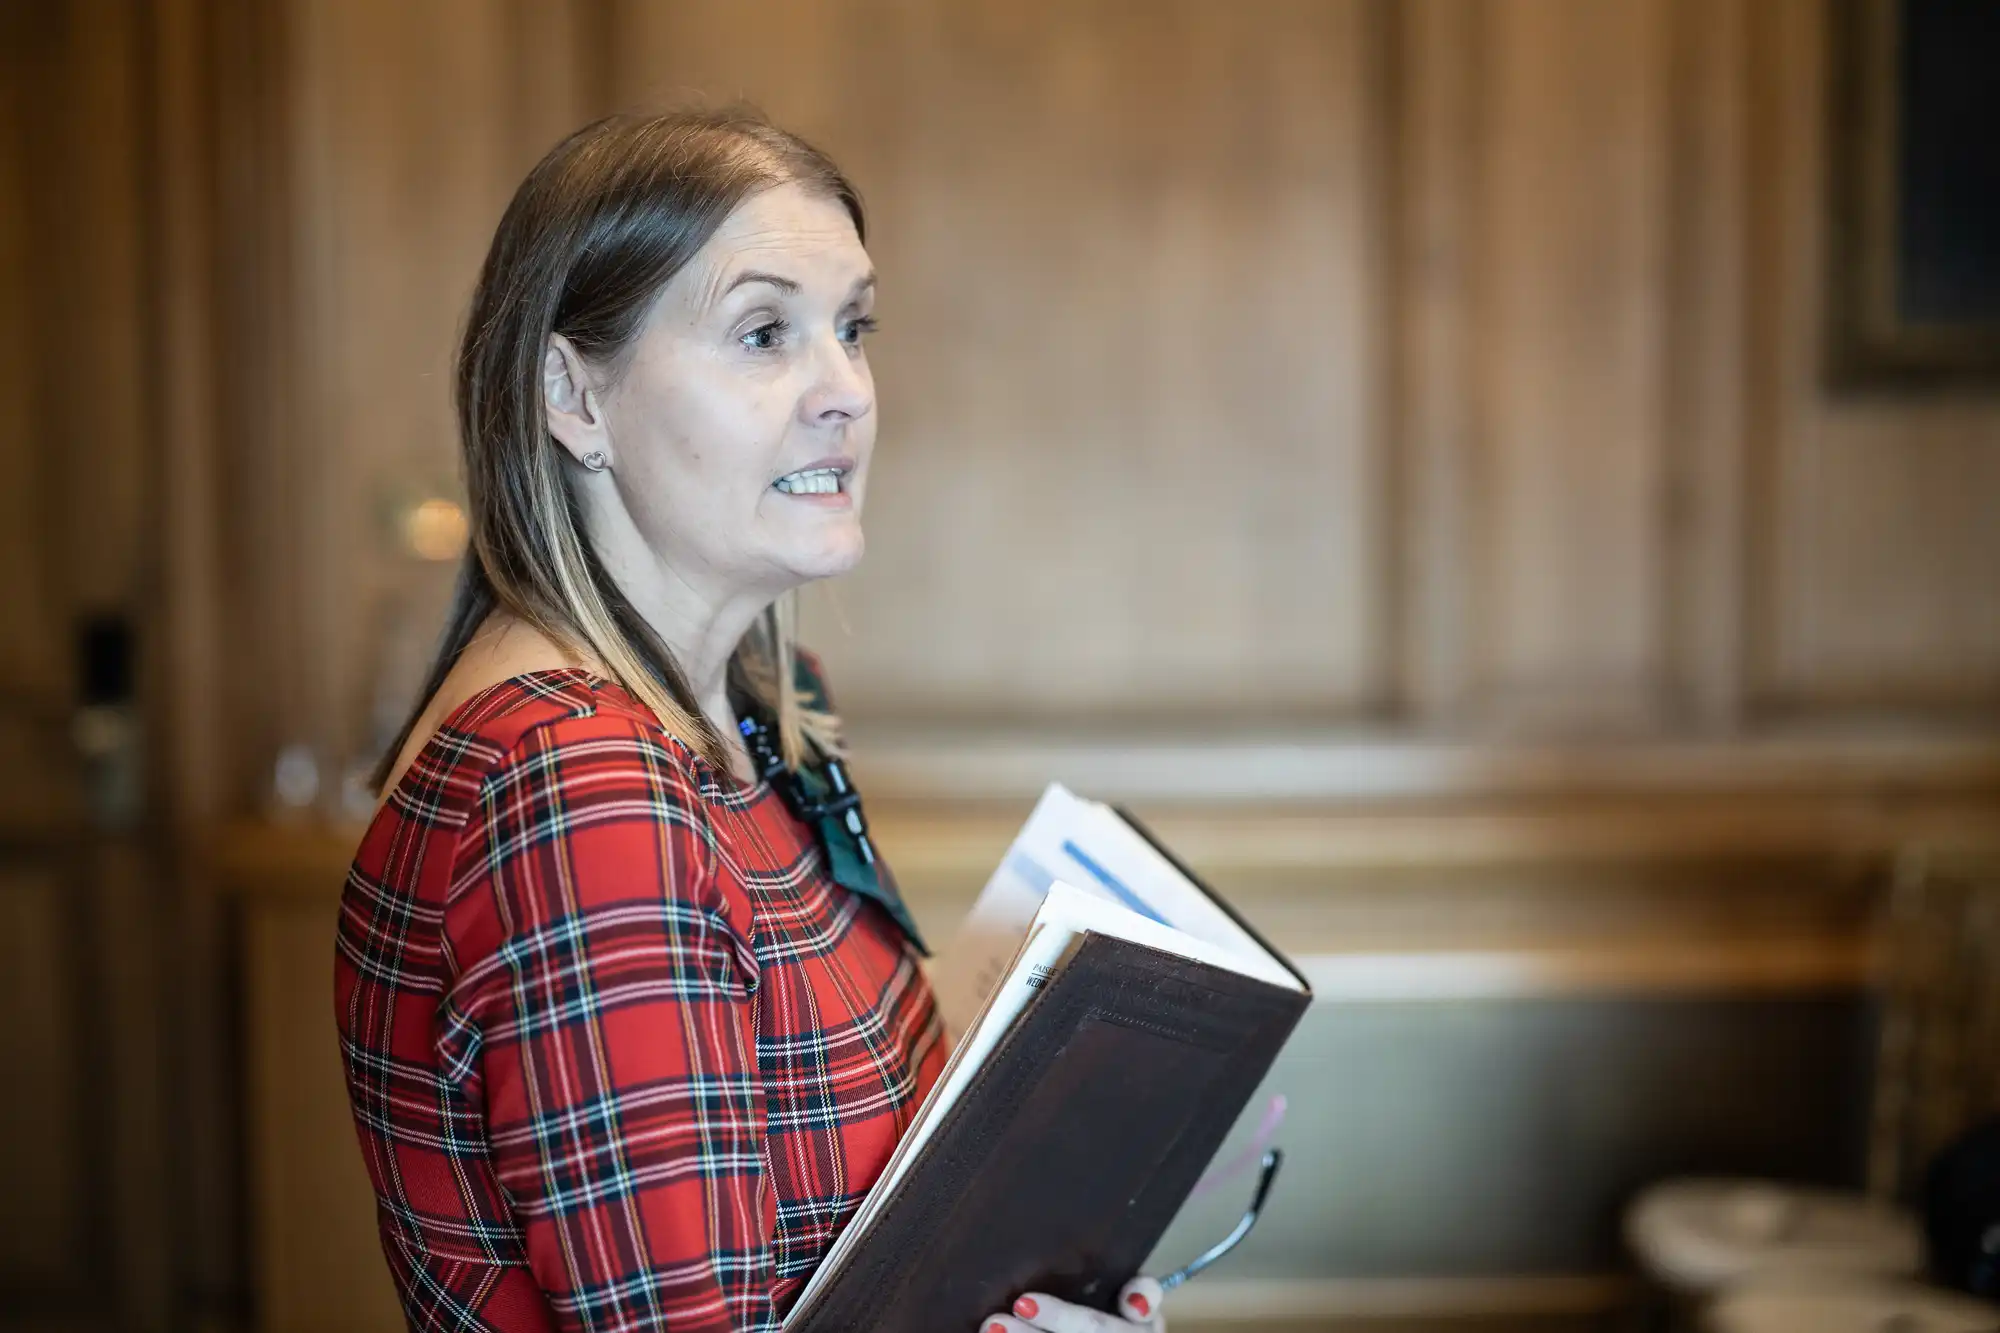 A person with shoulder-length hair wearing a red plaid outfit is holding a few books and papers while speaking in a wood-paneled room.